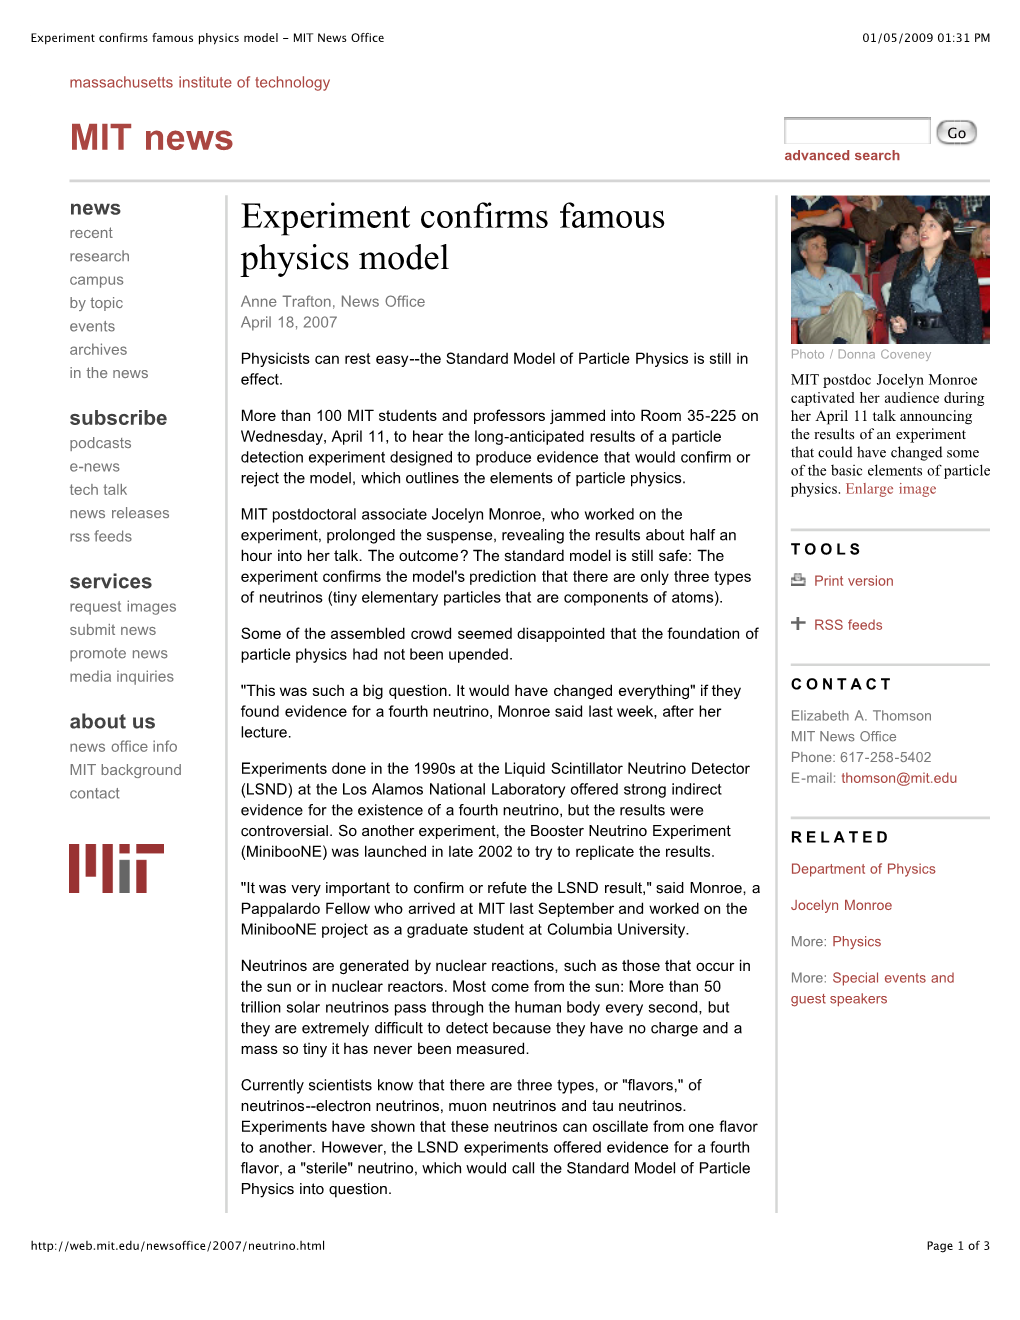 Experiment Confirms Famous Physics Model - MIT News Office 01/05/2009 01:31 PM